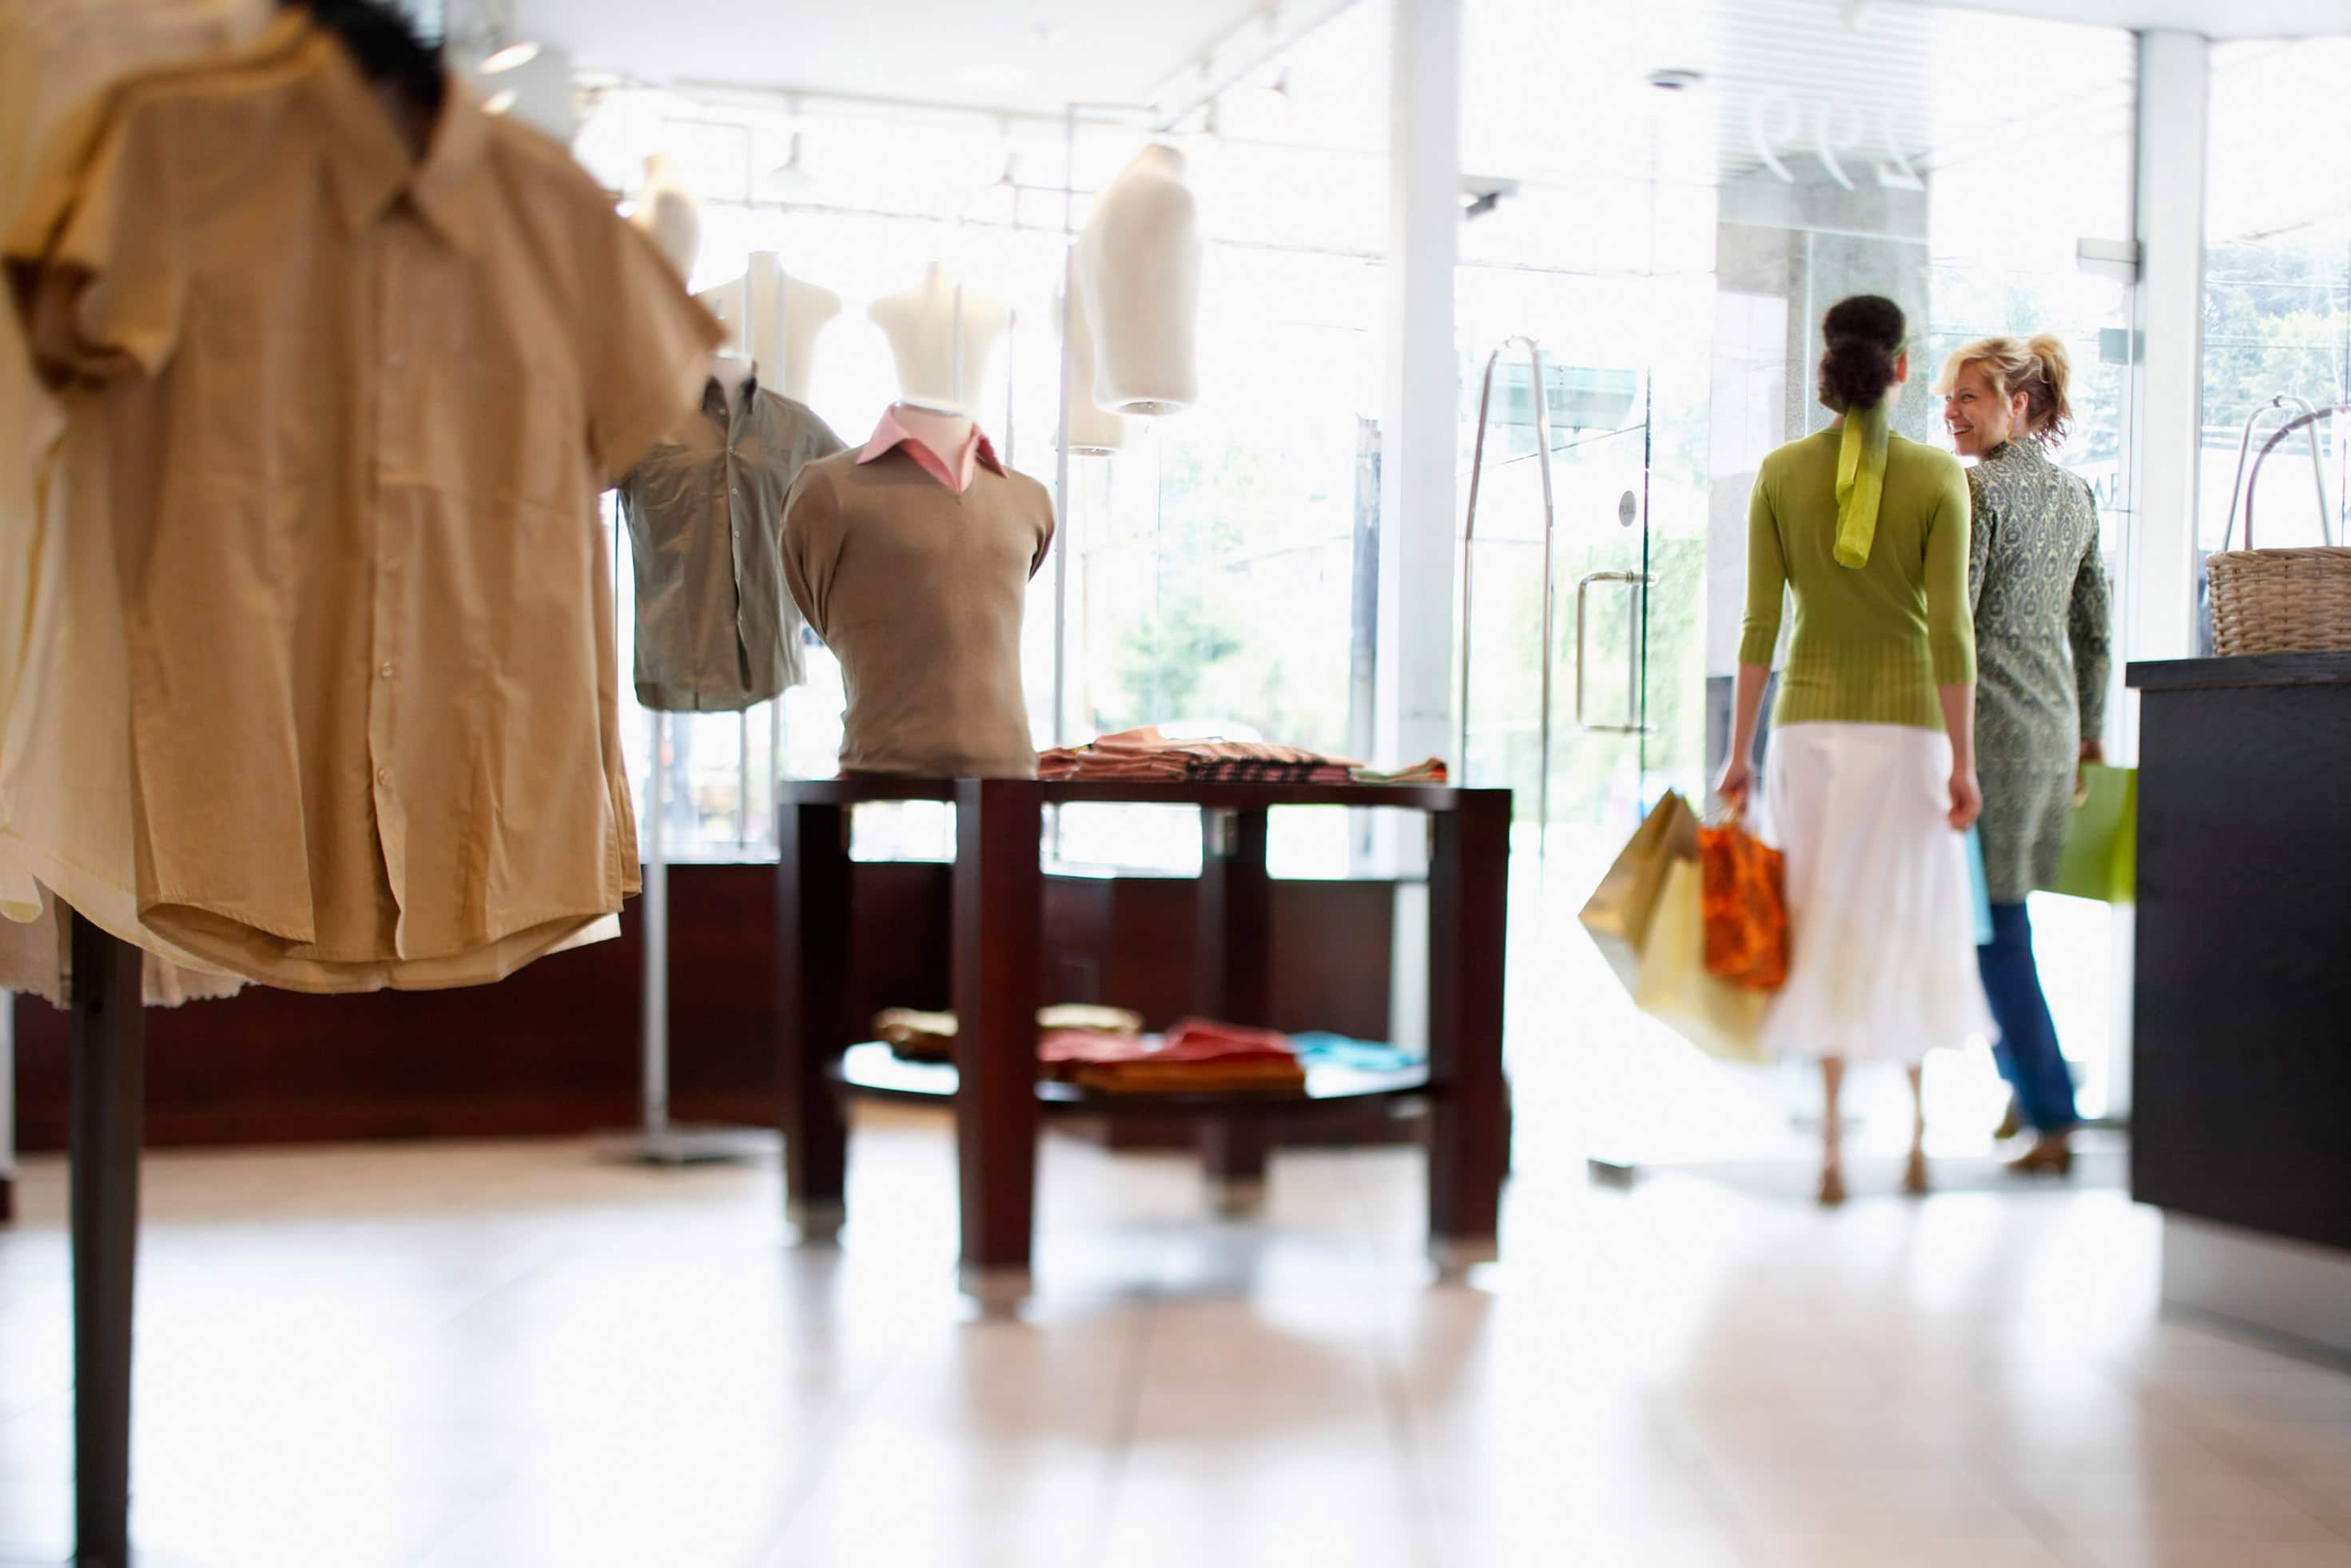 SAP Study Unveils Expected Shopping Habits as Recovery Rolls Out